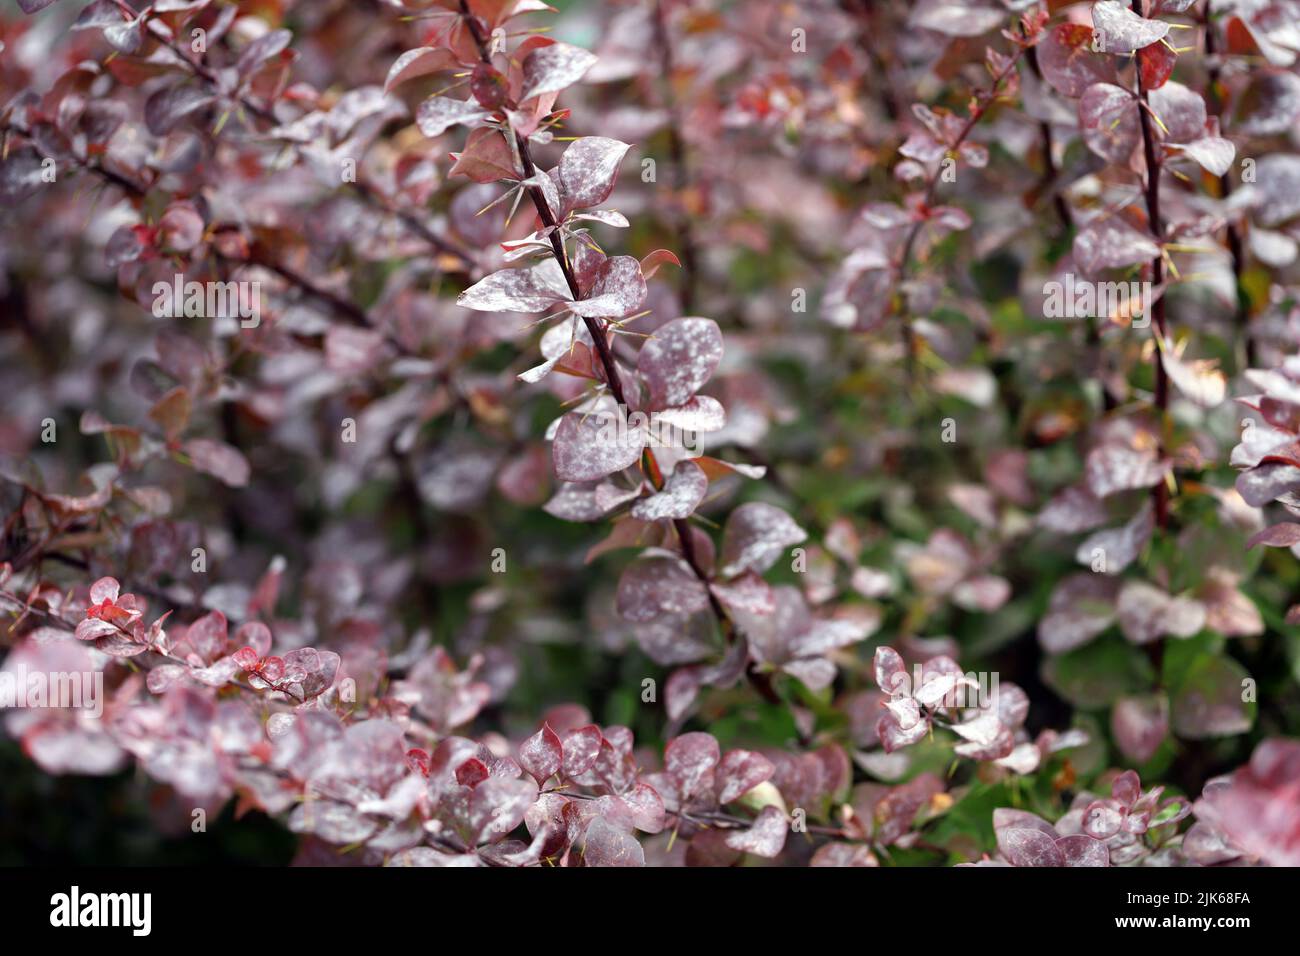 Powdery mildew, a fungal disease, infection on barberry leaves. Stock Photo